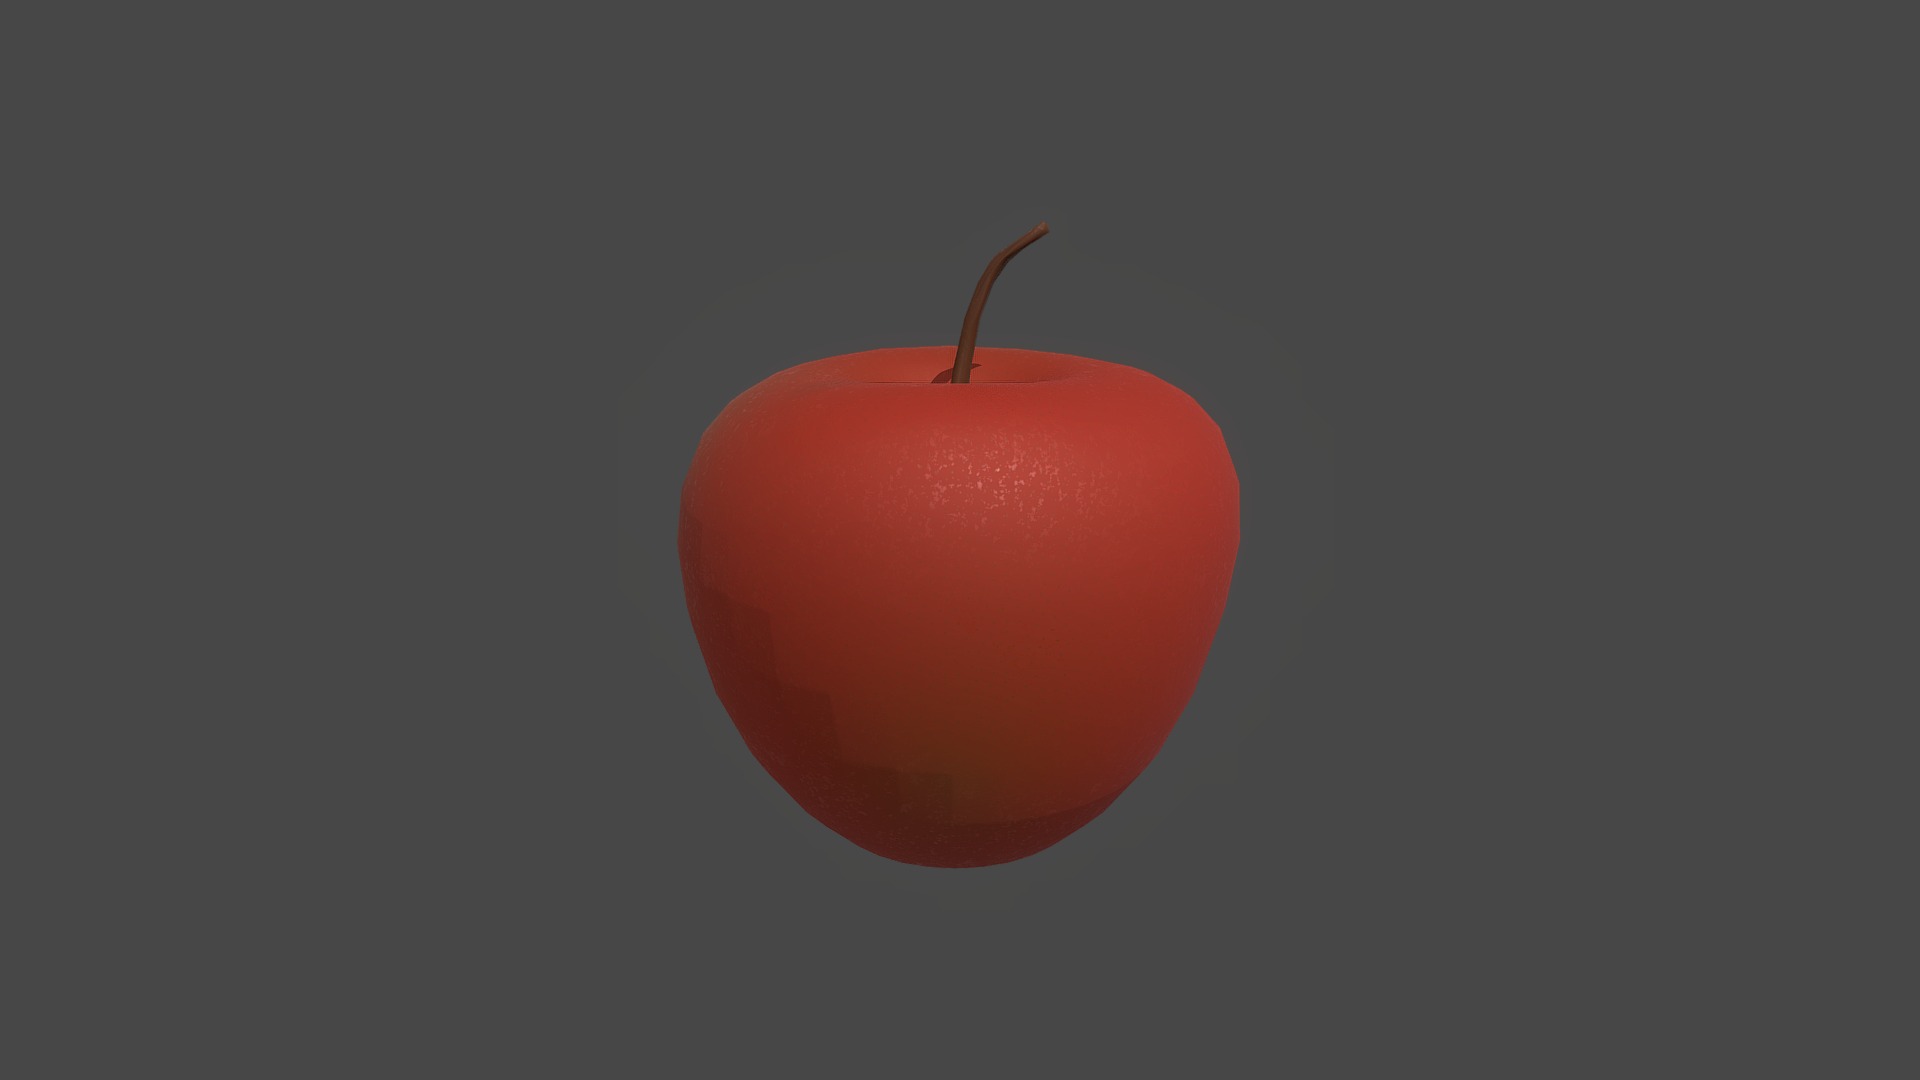 3D model apple - This is a 3D model of the apple. The 3D model is about a red apple on a black background.